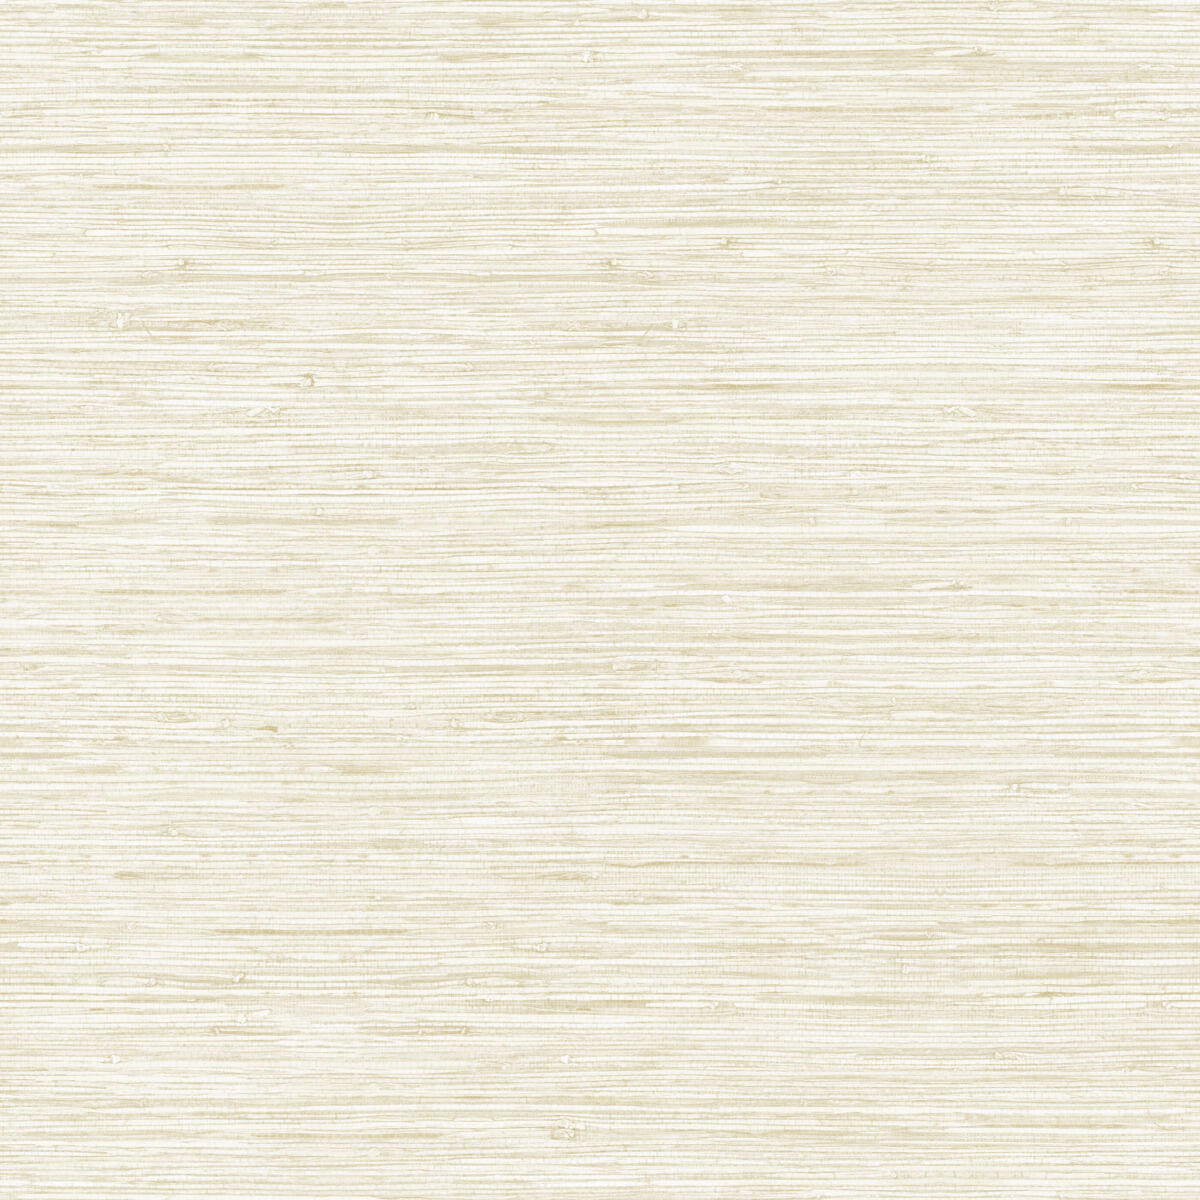 Grasscloth Resource Library Faux Grasscloth Wallpaper - Off White